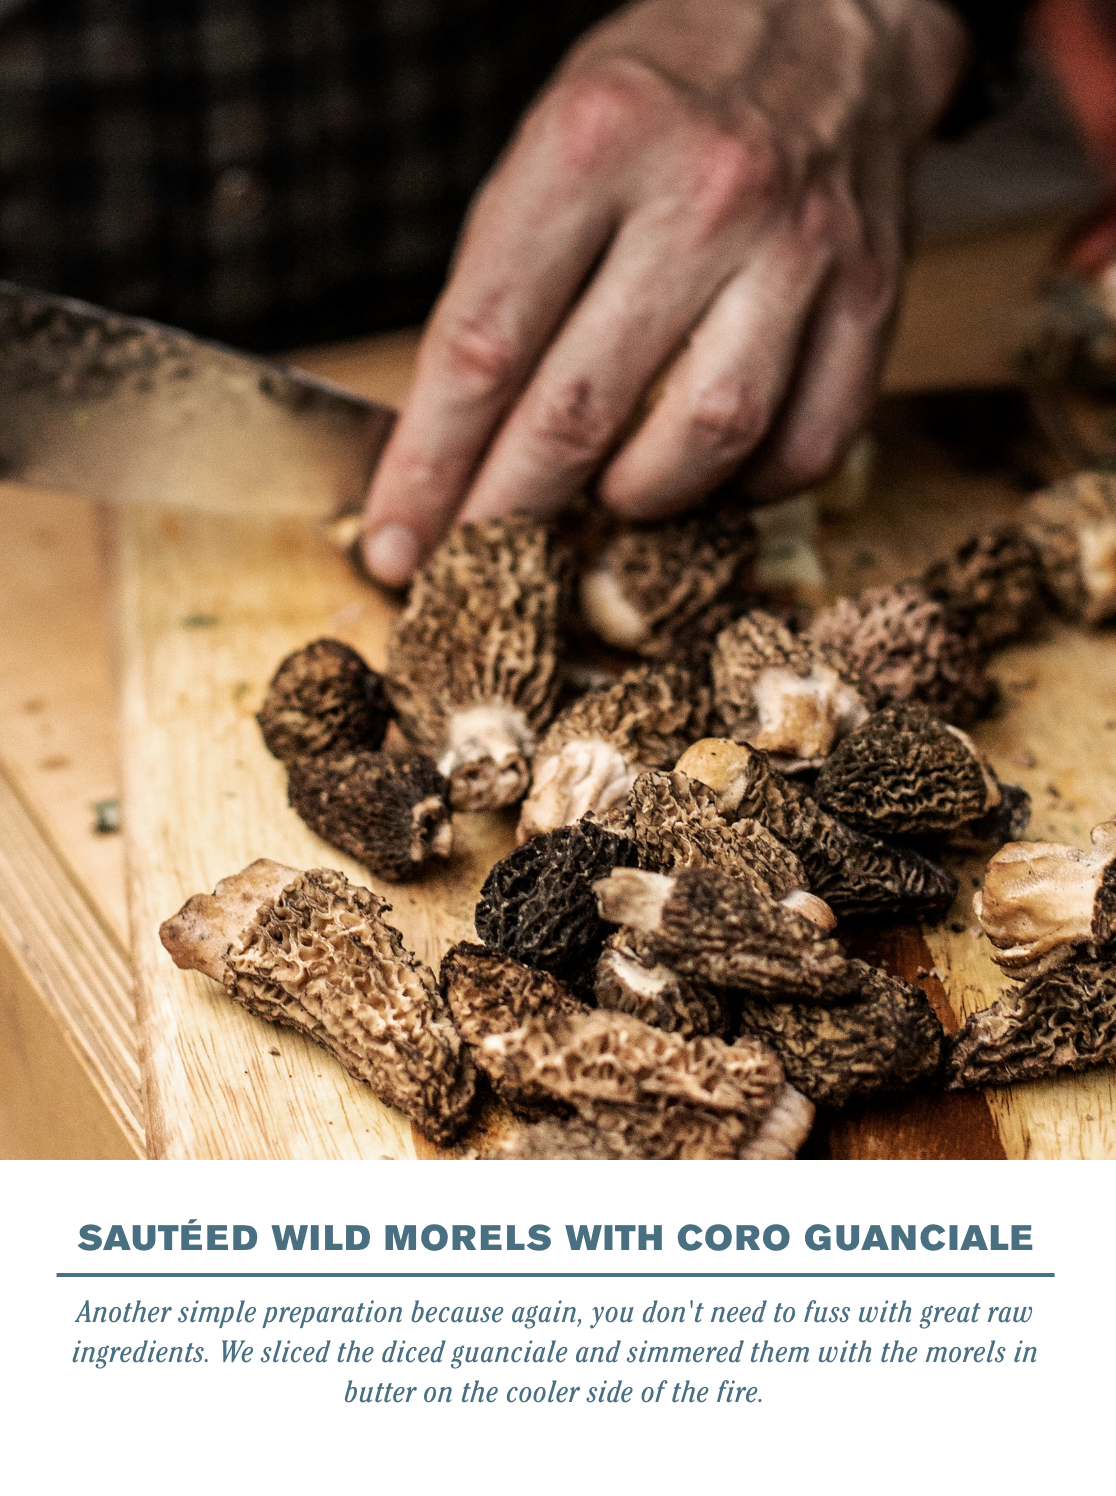  SAUTÉED WILD MORELS WITH CORO GUANCIALE    Another simple preparation because again, you don’t need to fuss with great raw ingredients. We sliced the diced guanciale and simmered them with the morels in butter on the cooler side of the fire. 